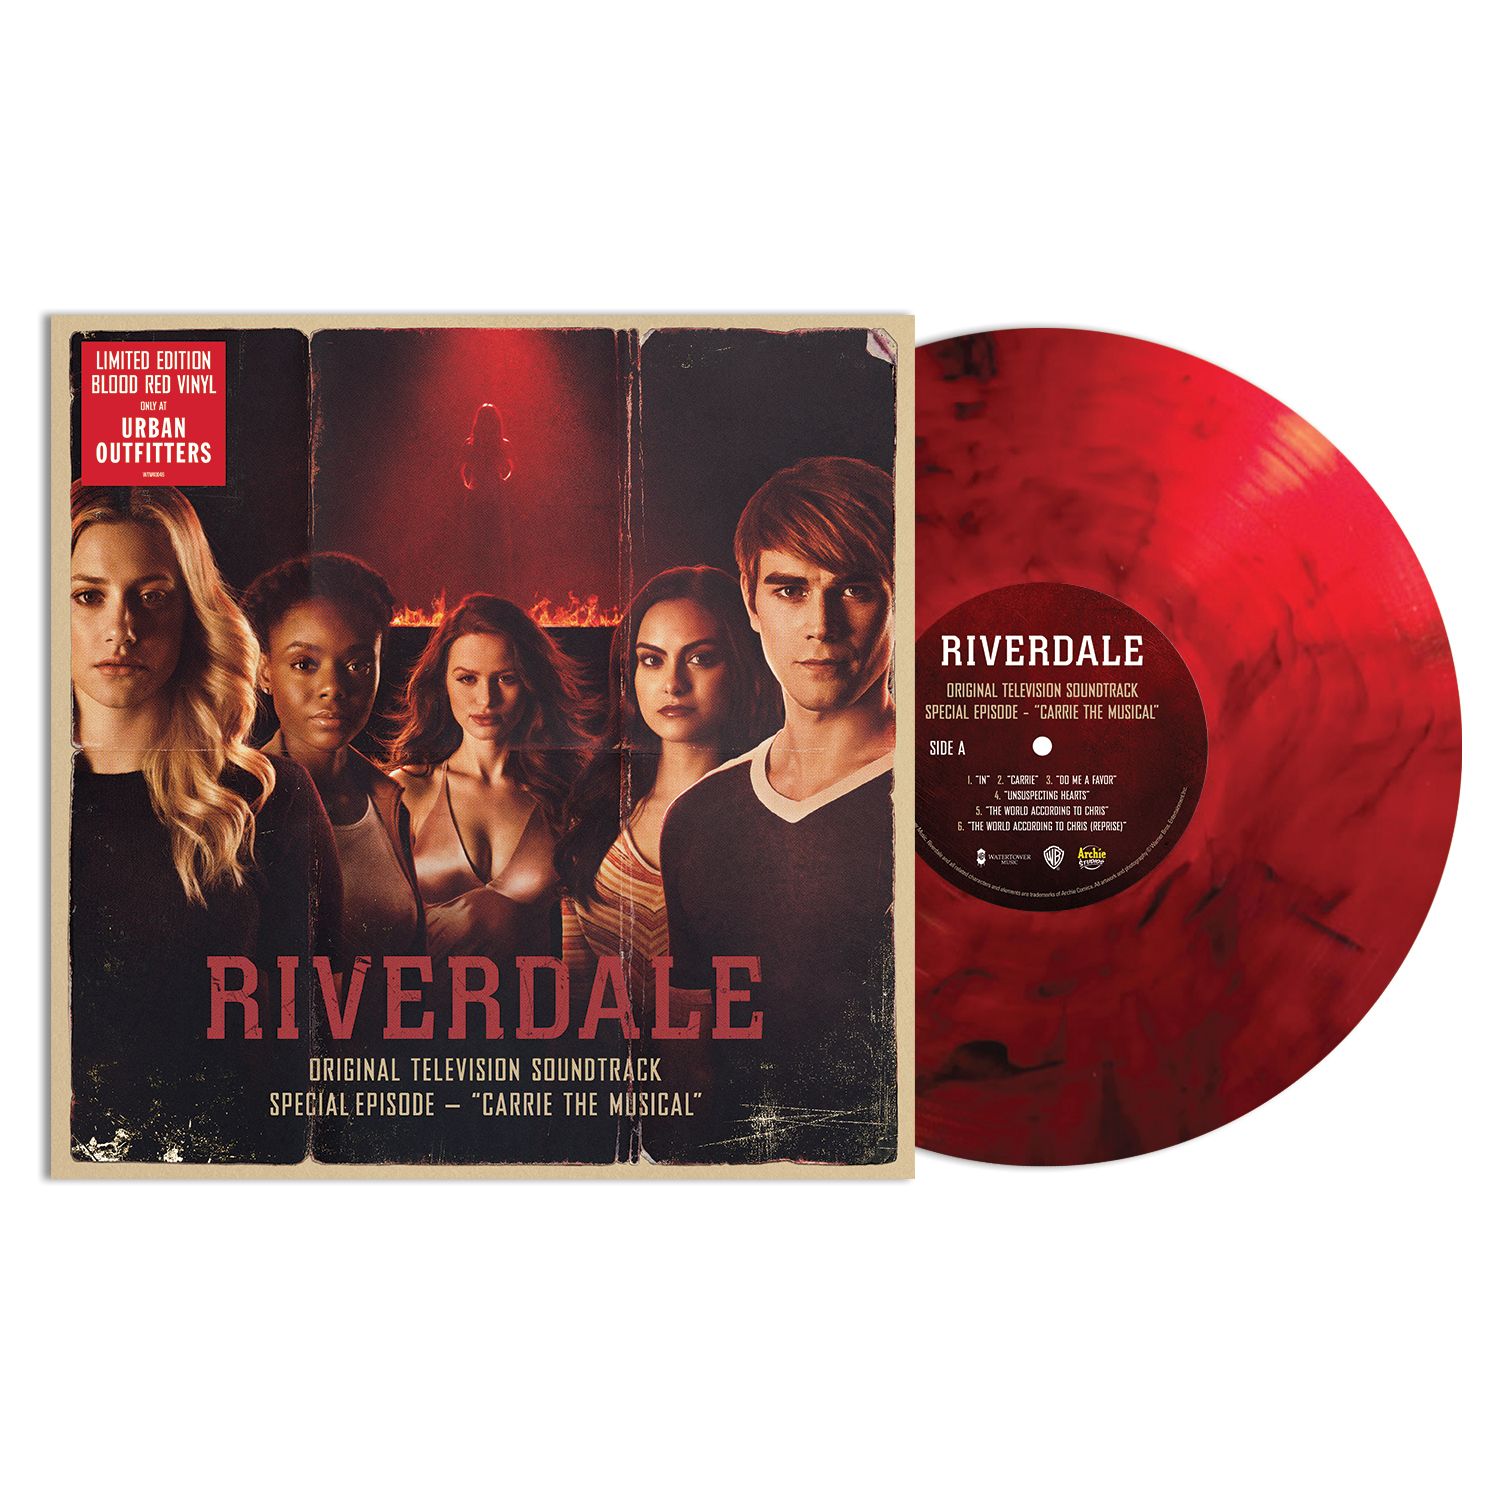 Riverdale: Special Episode - Carrie the Musical (Original Television Soundtrack) Blood Red vinyl edition